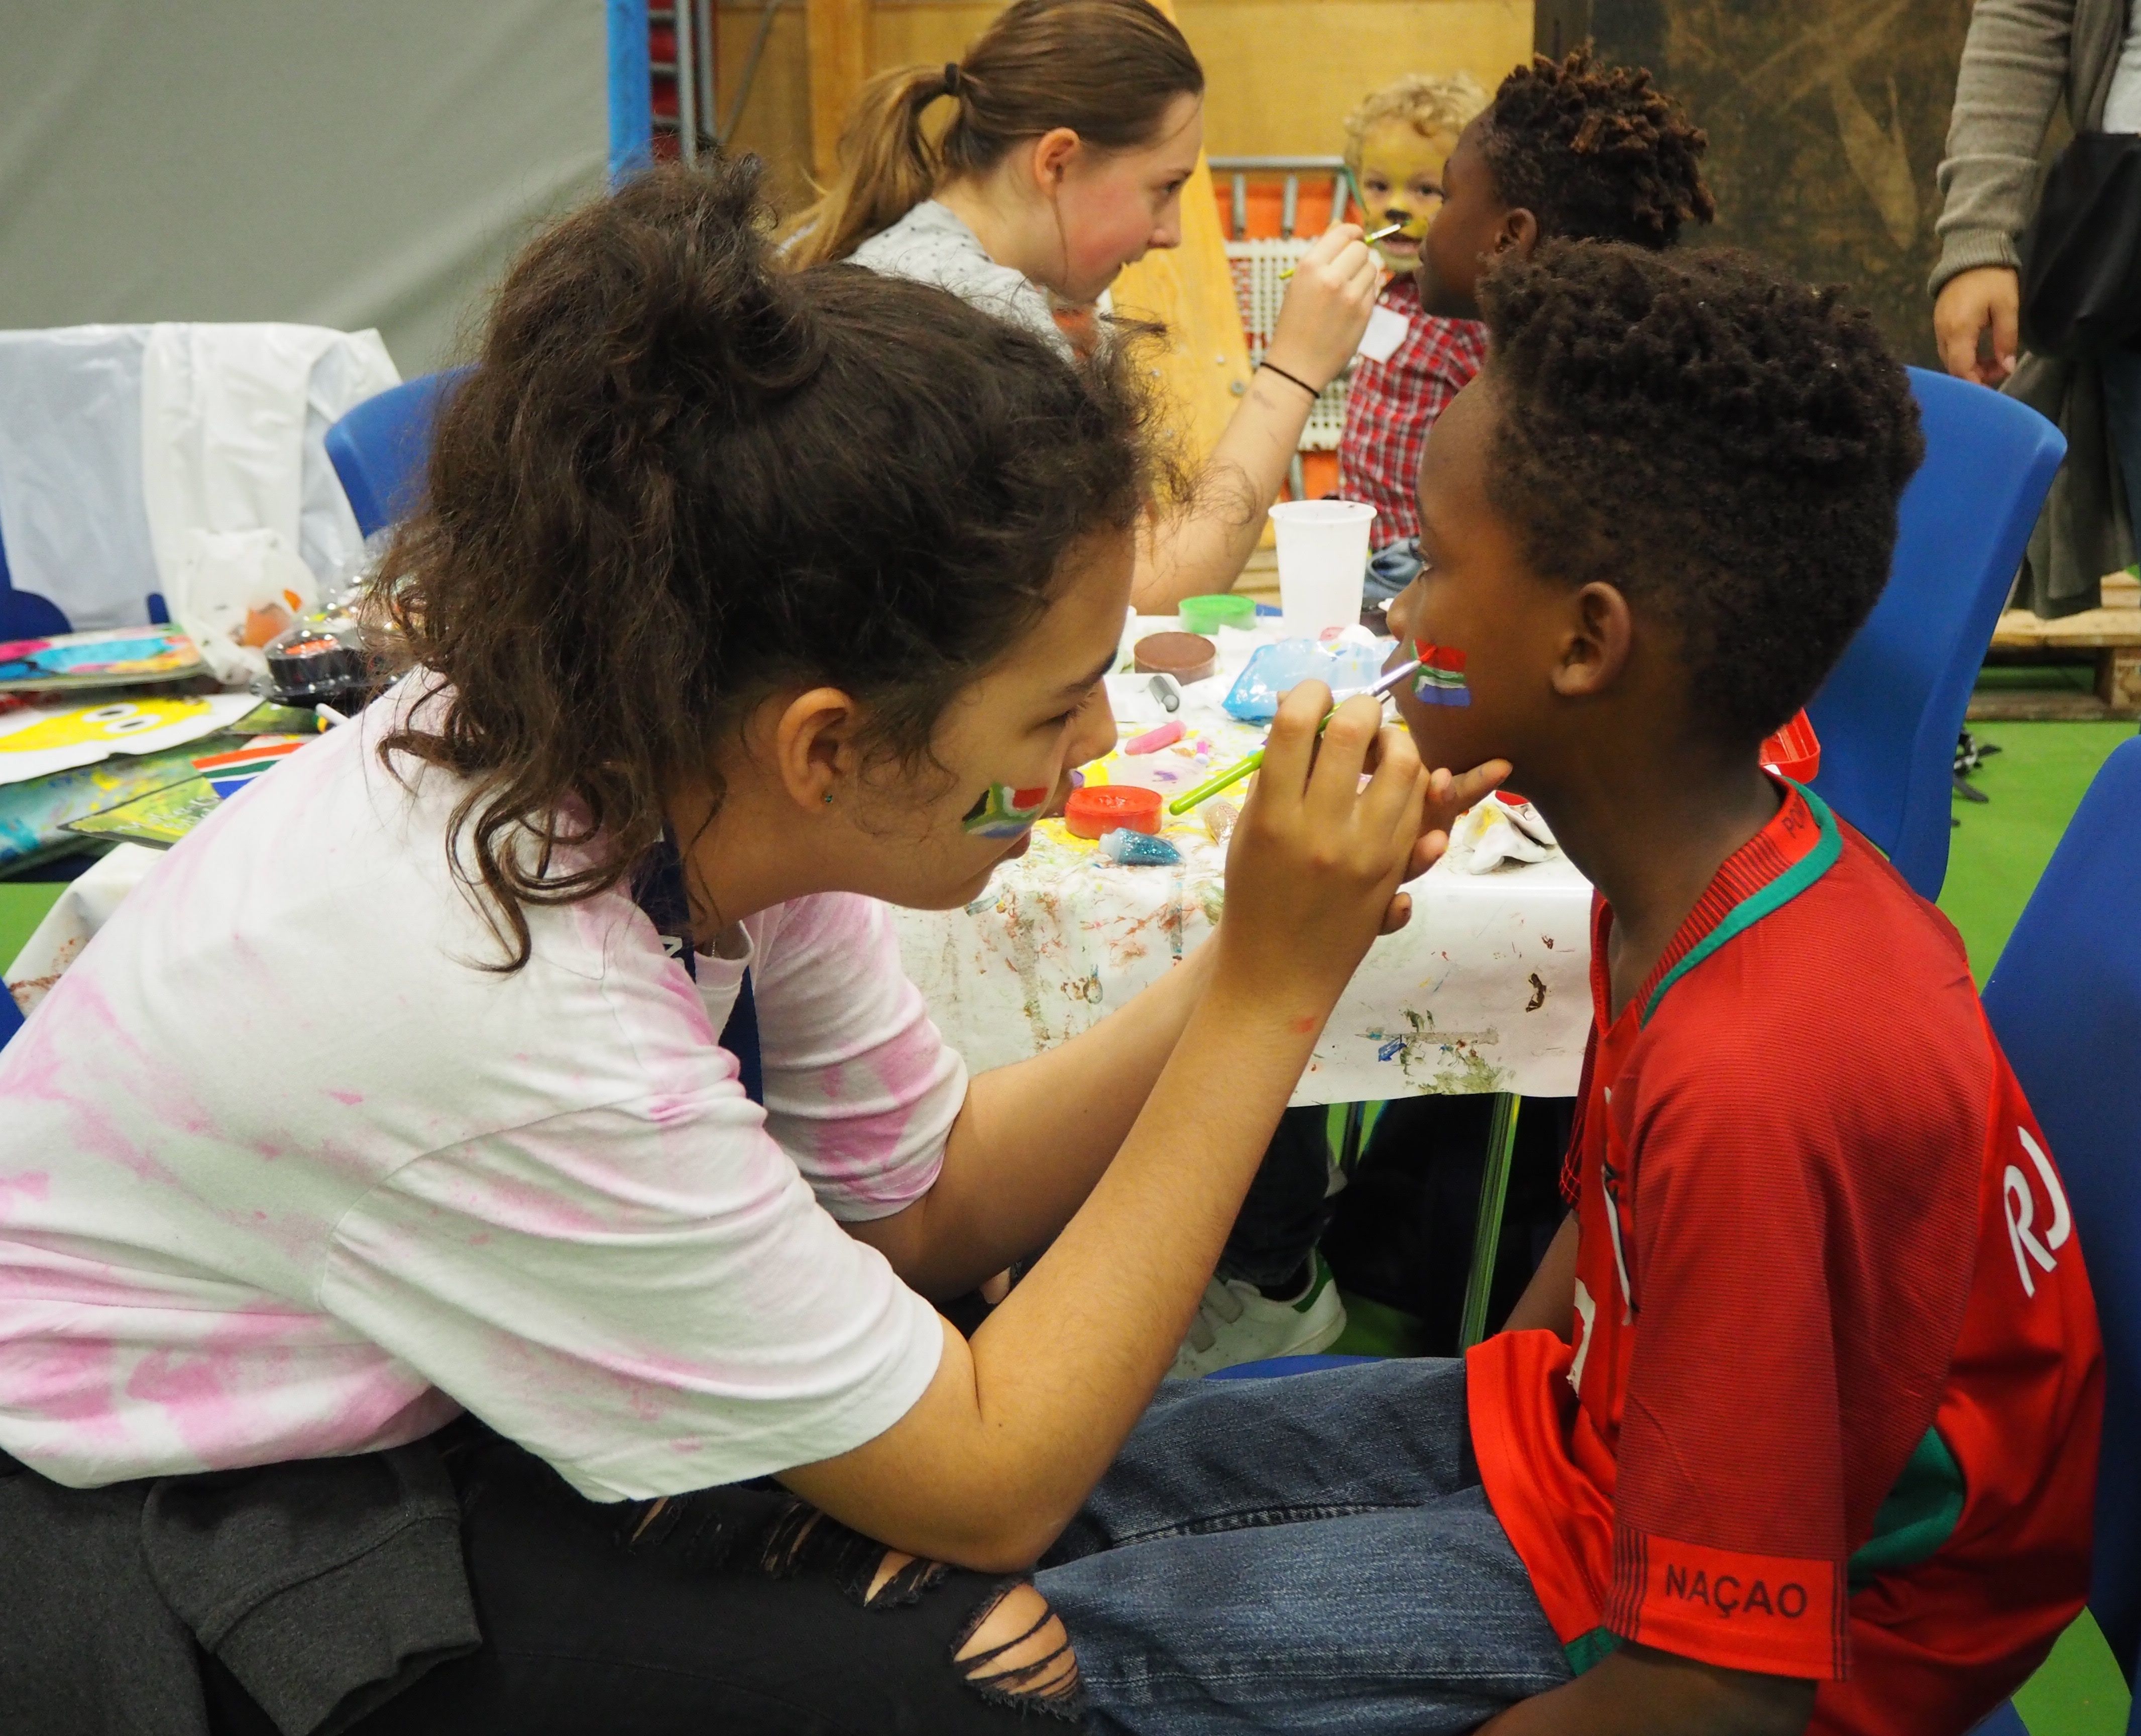 NGG International students face-painted kids at South African Embassy